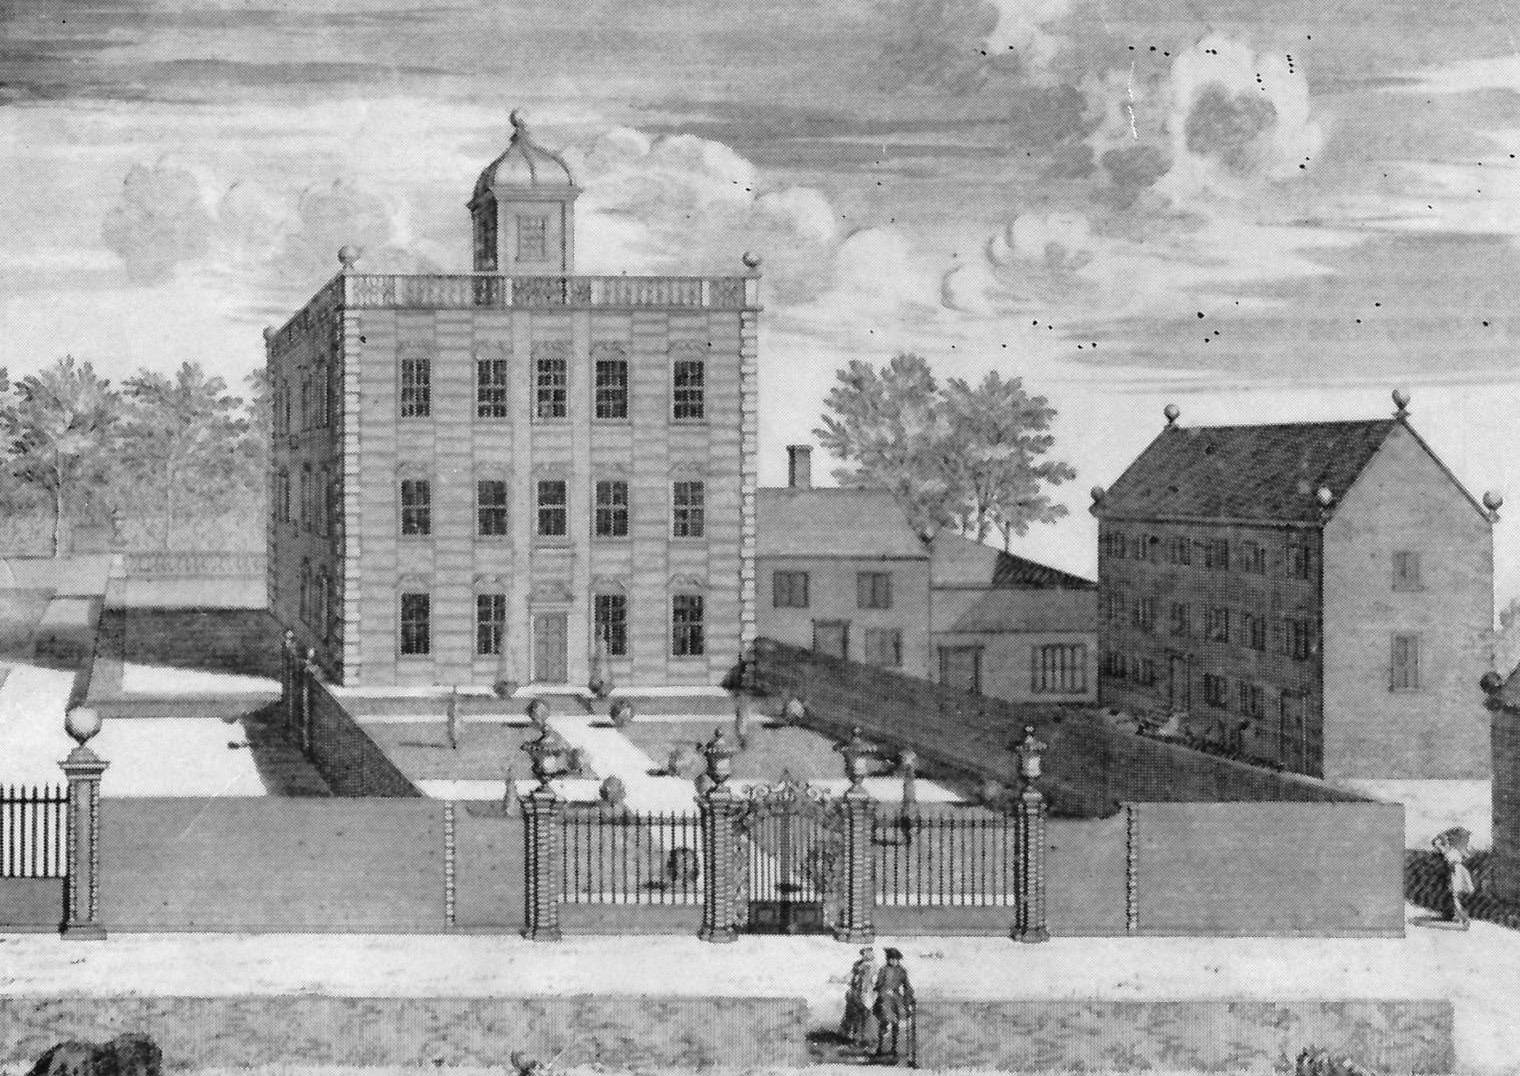 An historical sketch depicting the original house located at Swinton Park